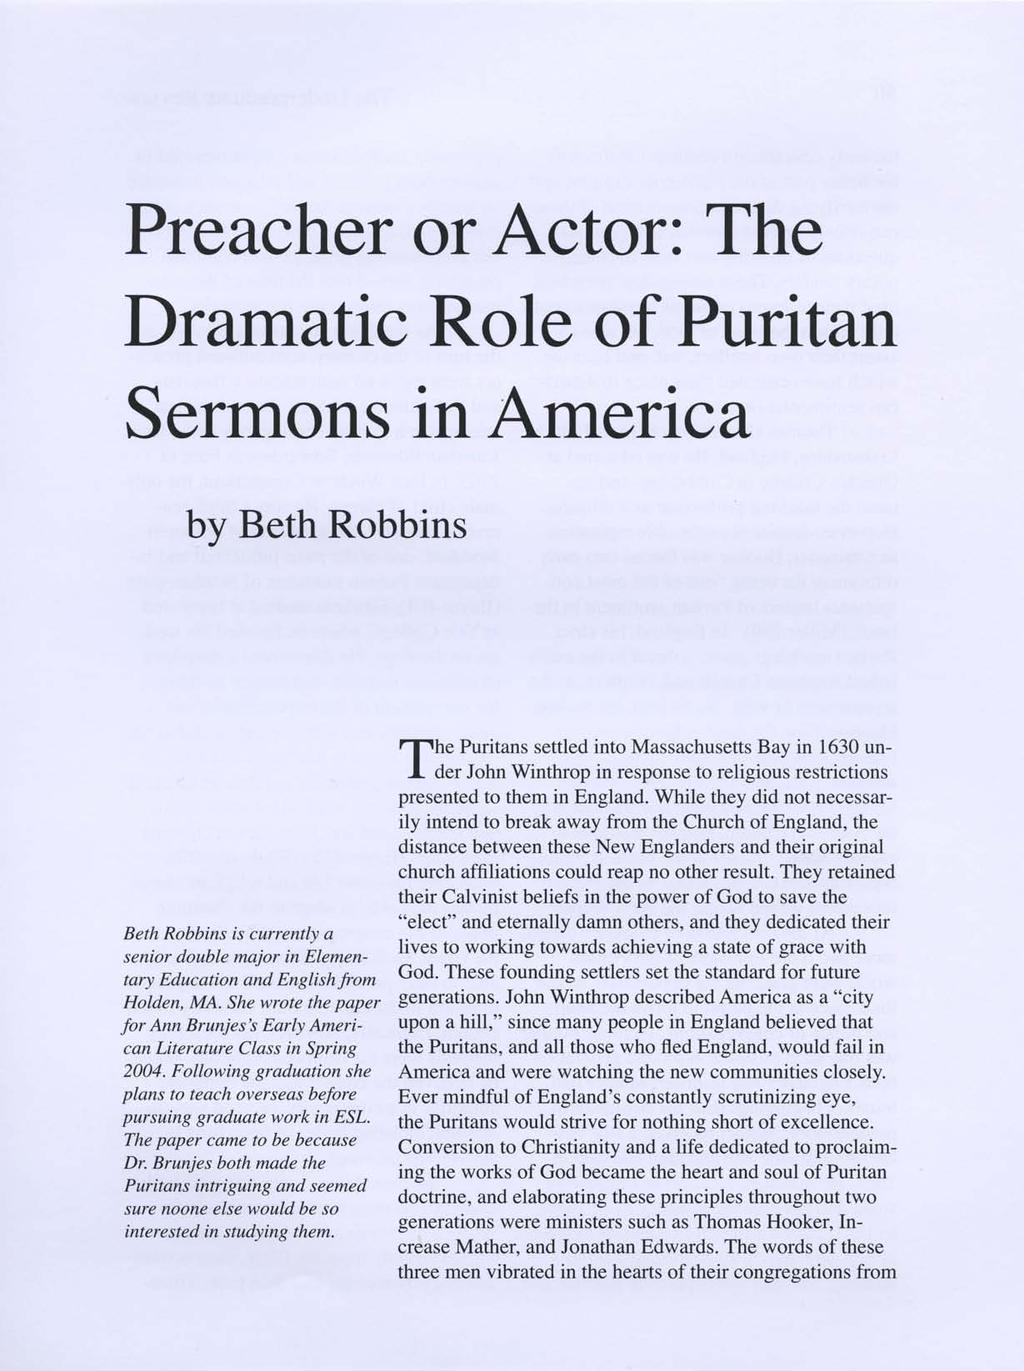 Preacher or Actor: The Dramatic Role of Puritan Sermons in America by Beth Robbins Beth Robbins is currently a senior double major in Elementary Education and English from Holden, MA.